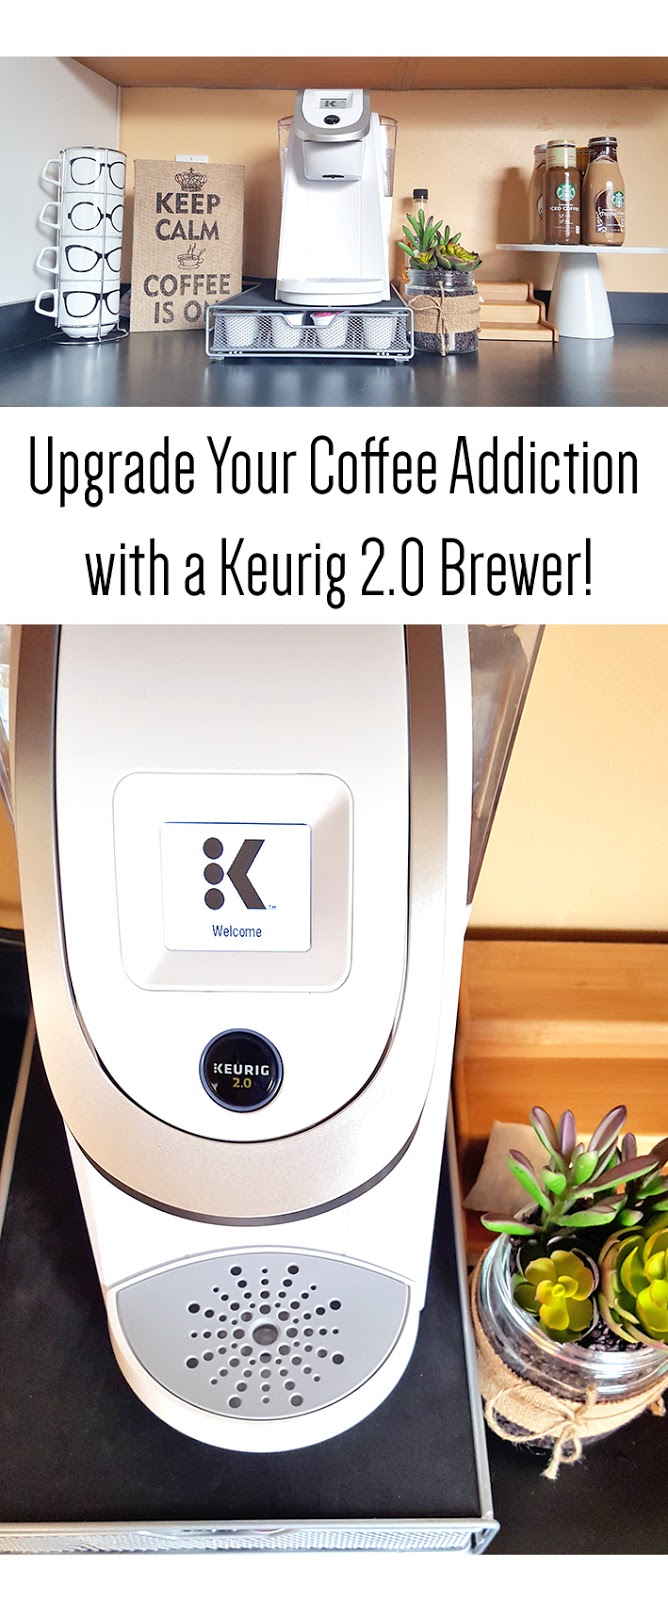 Check out all the specs on the Keurig 2.0 K200 and find out why you should upgrade your coffee addiction to another level...